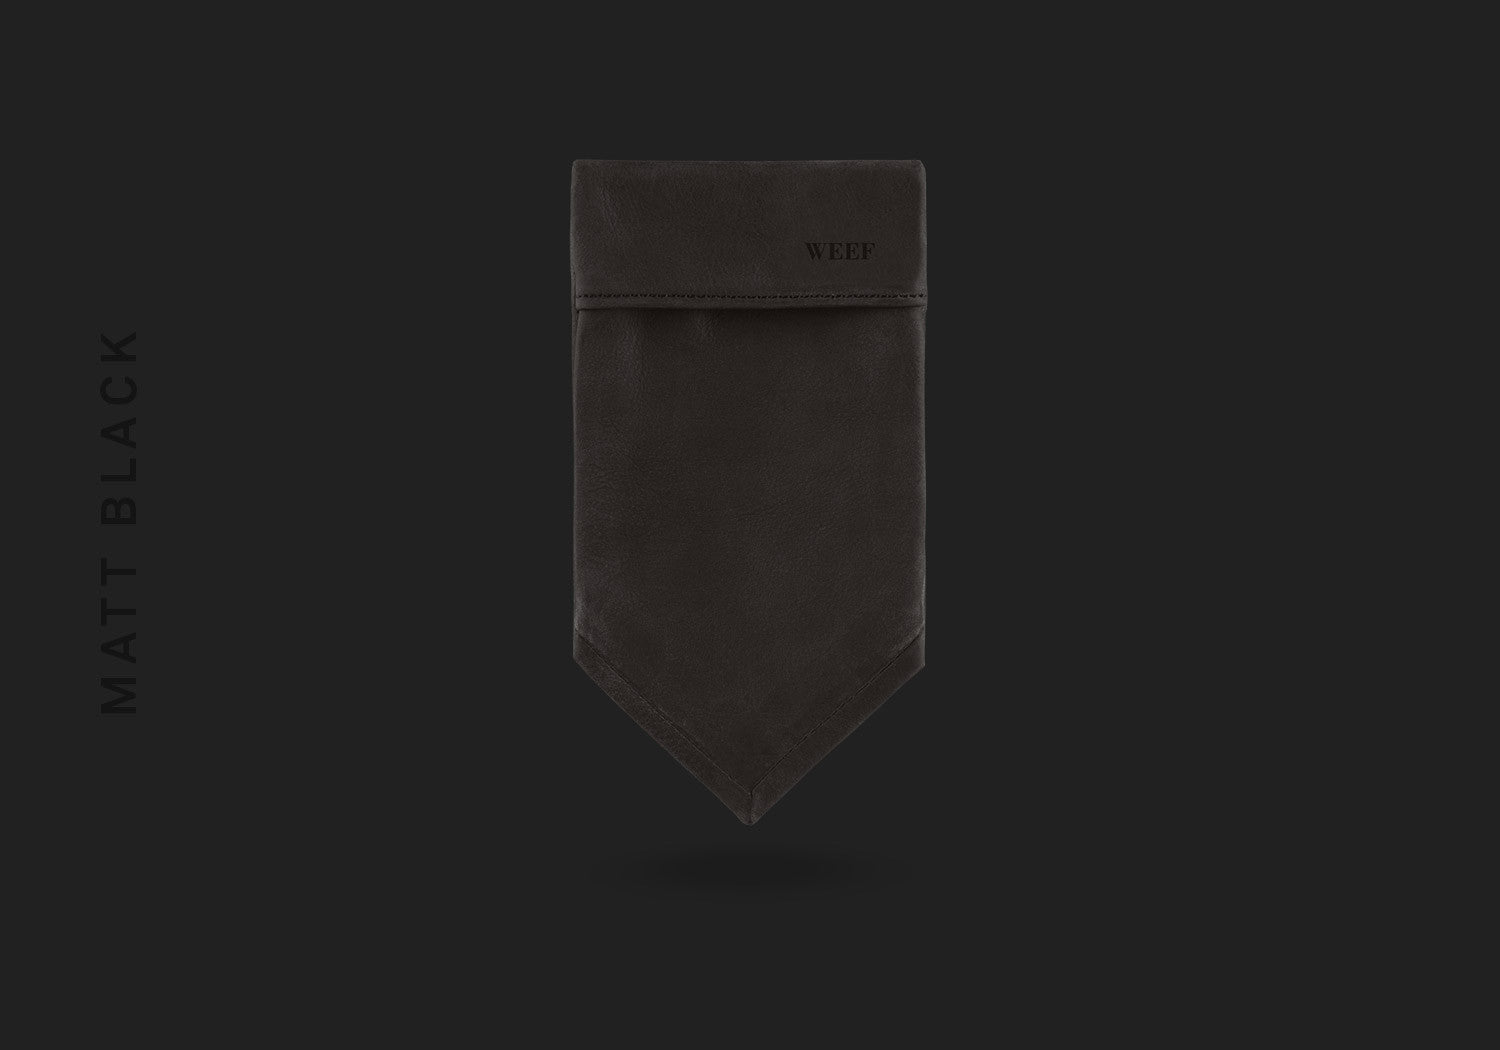 This matt black WEEF handmade leather pocket square is a great present or gift idea for dapper and stylish gentlemen for fathers day, valentines day or Christmas.